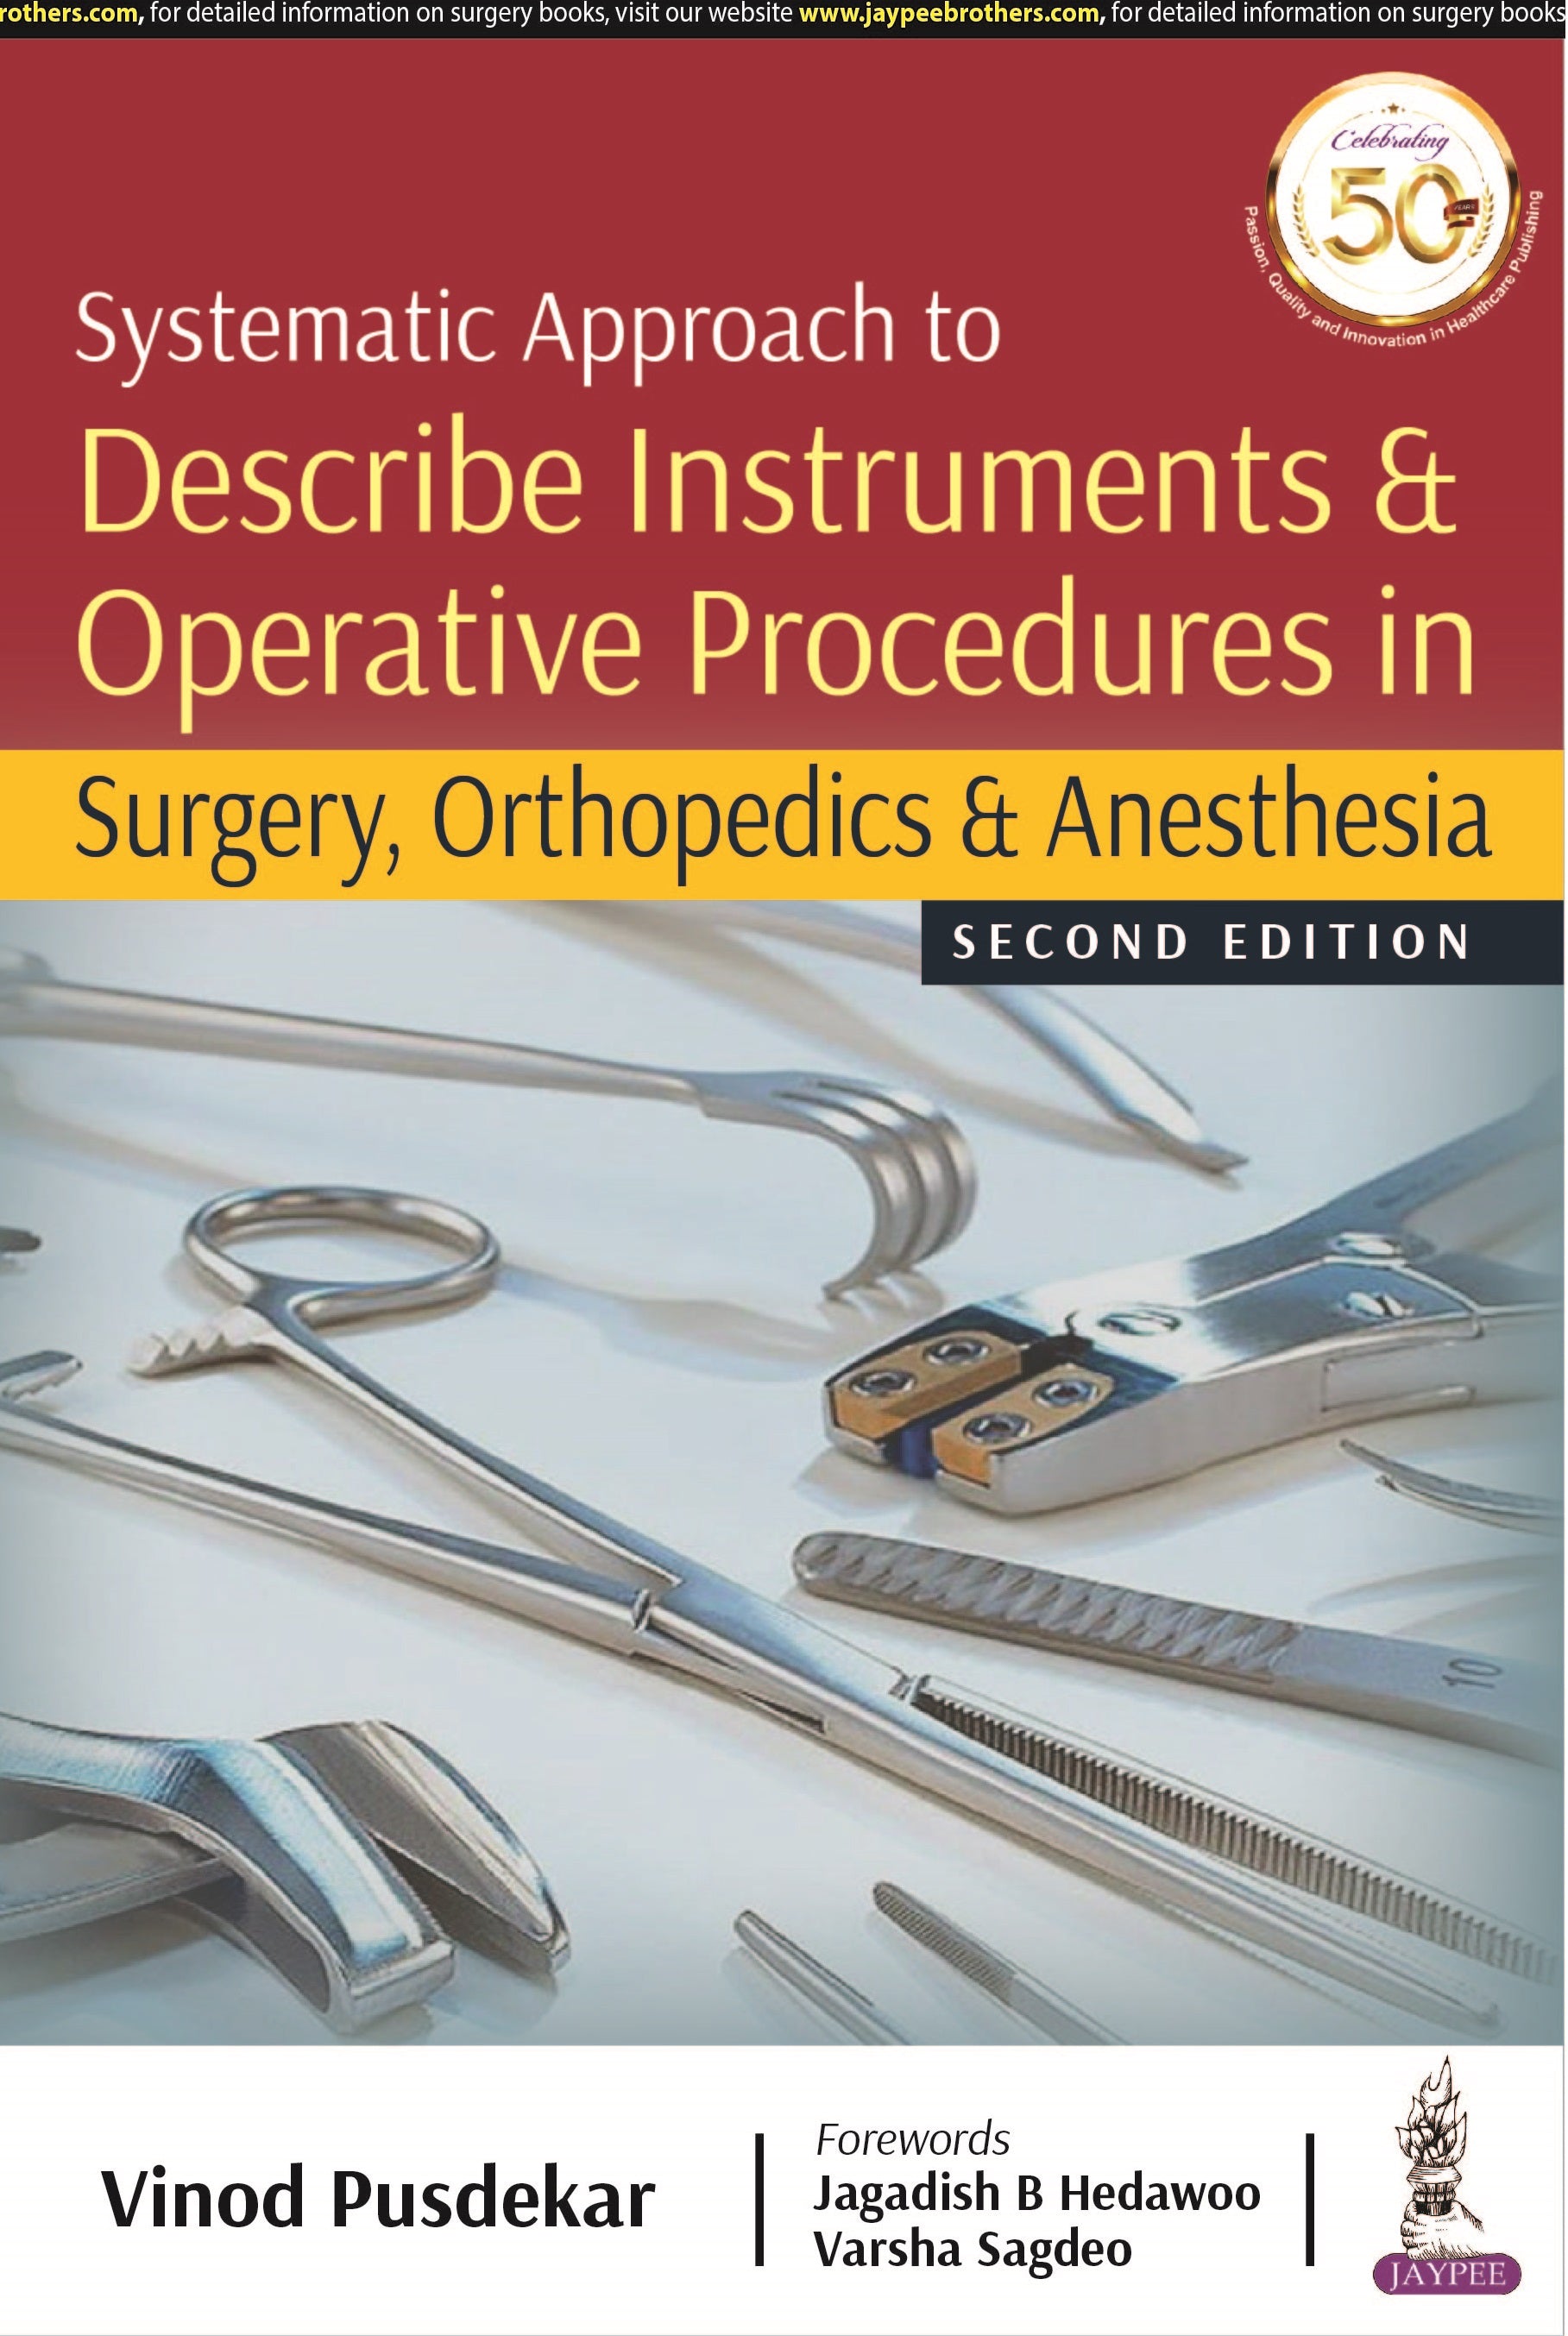 SYSTEMATIC APPROACH TO DESCRIBE INSTRUMENTS & OPERATIVE PROCEDURES IN SURGERY, ORTHOPEDICS & ANESTHE,2/E,VINOD PUSDEKAR